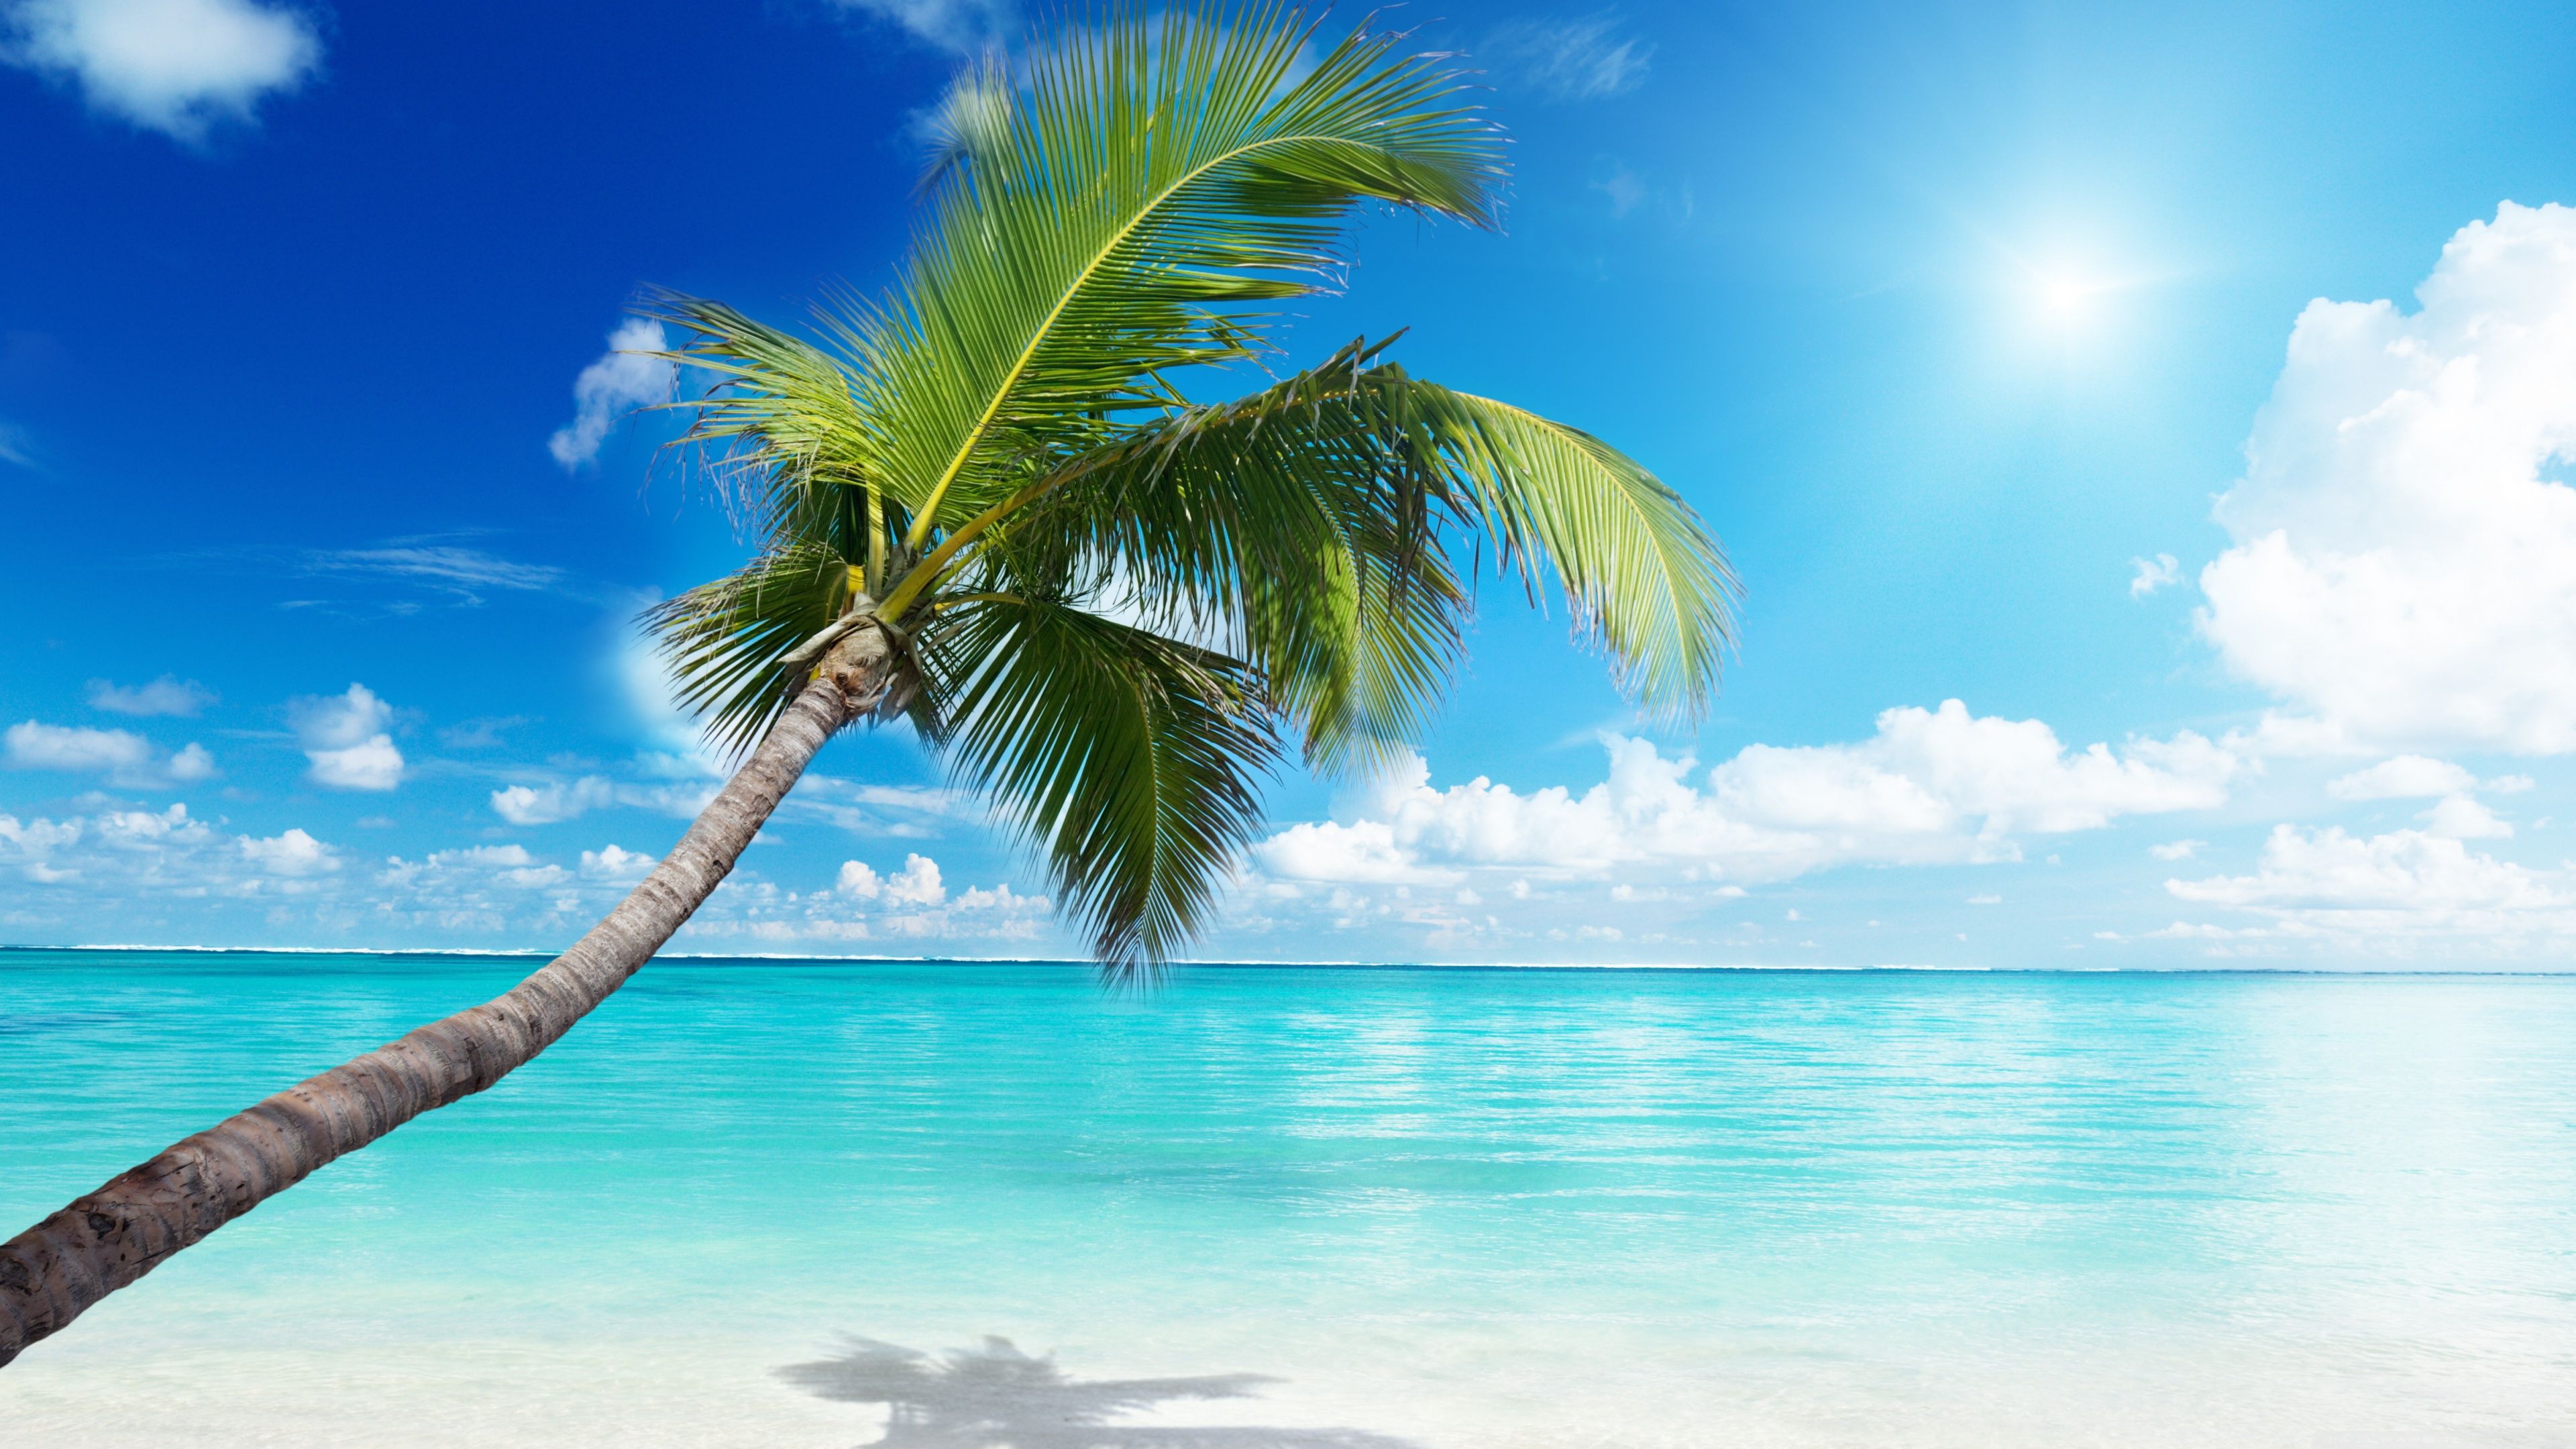 Free download Palm Tree Beach 4K HD Desktop Wallpaper for 4K Ultra HD TV [3840x2160] for your Desktop, Mobile & Tablet. Explore Beach Wallpaper 1024x768. Beach Picture for Computer